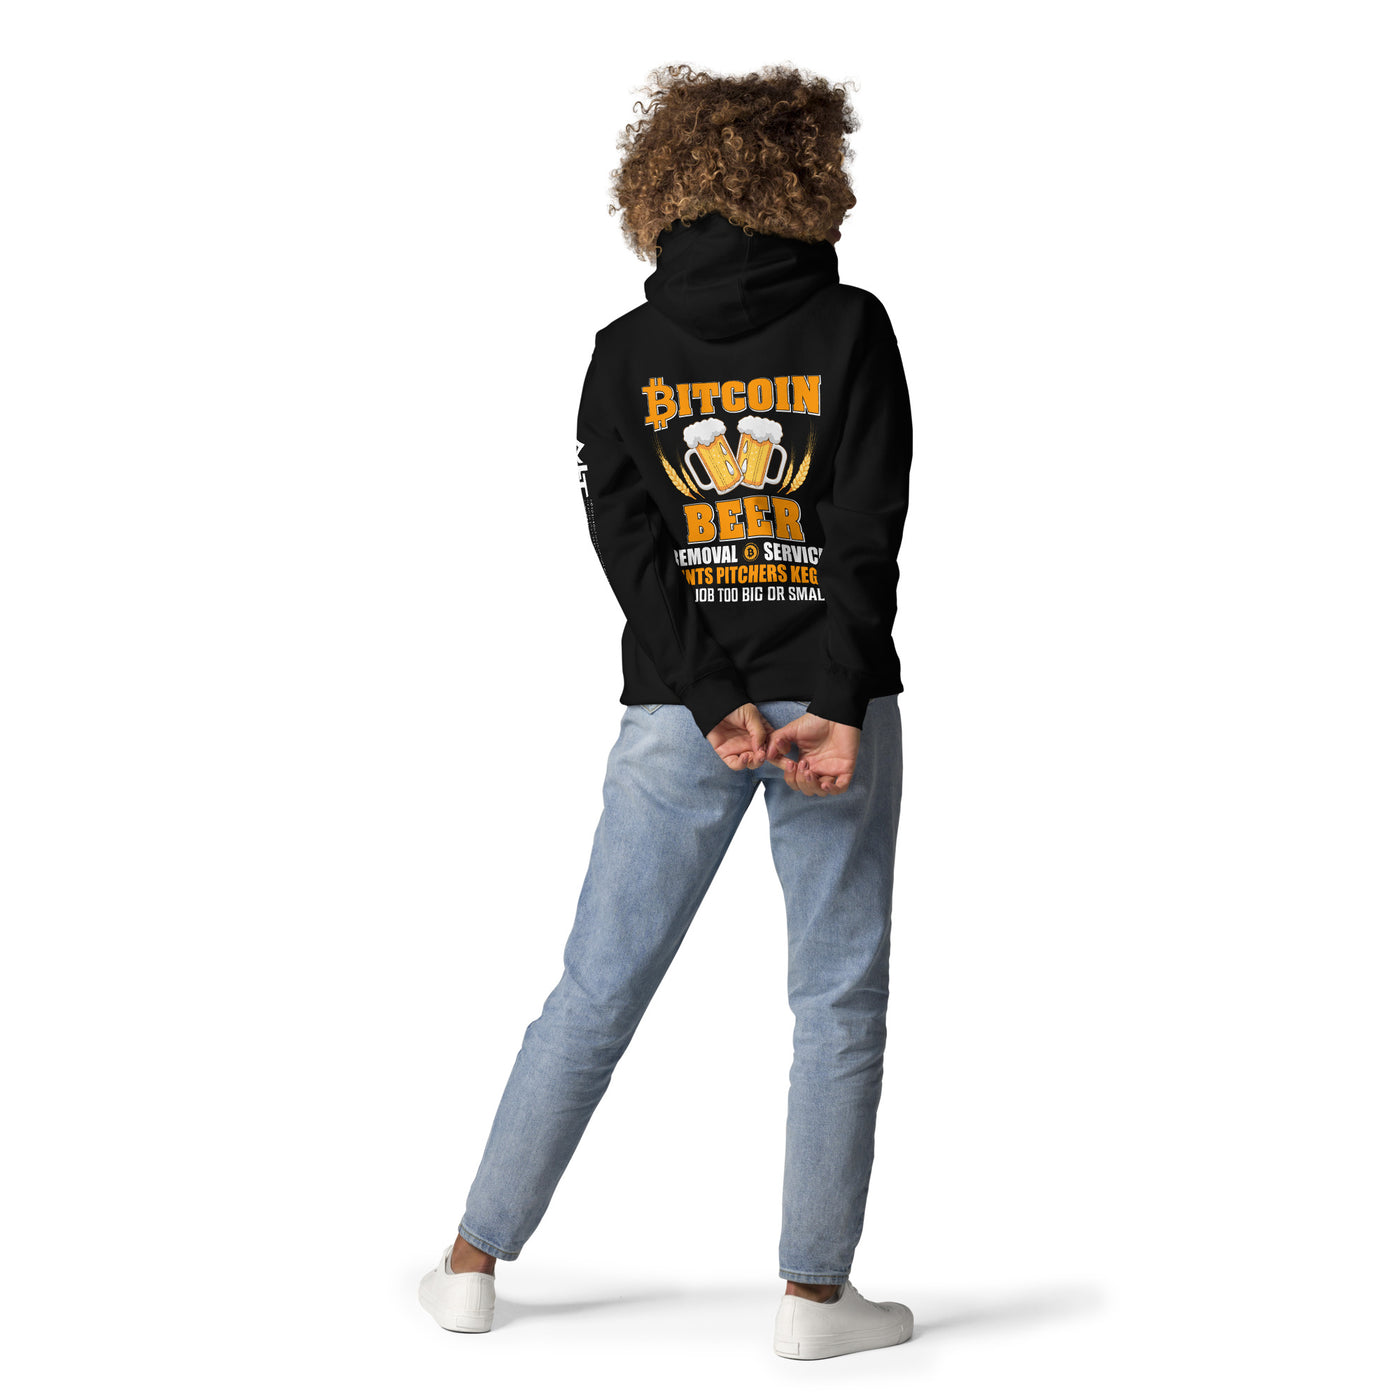 Bitcoin Beer Removal Service - Unisex Hoodie